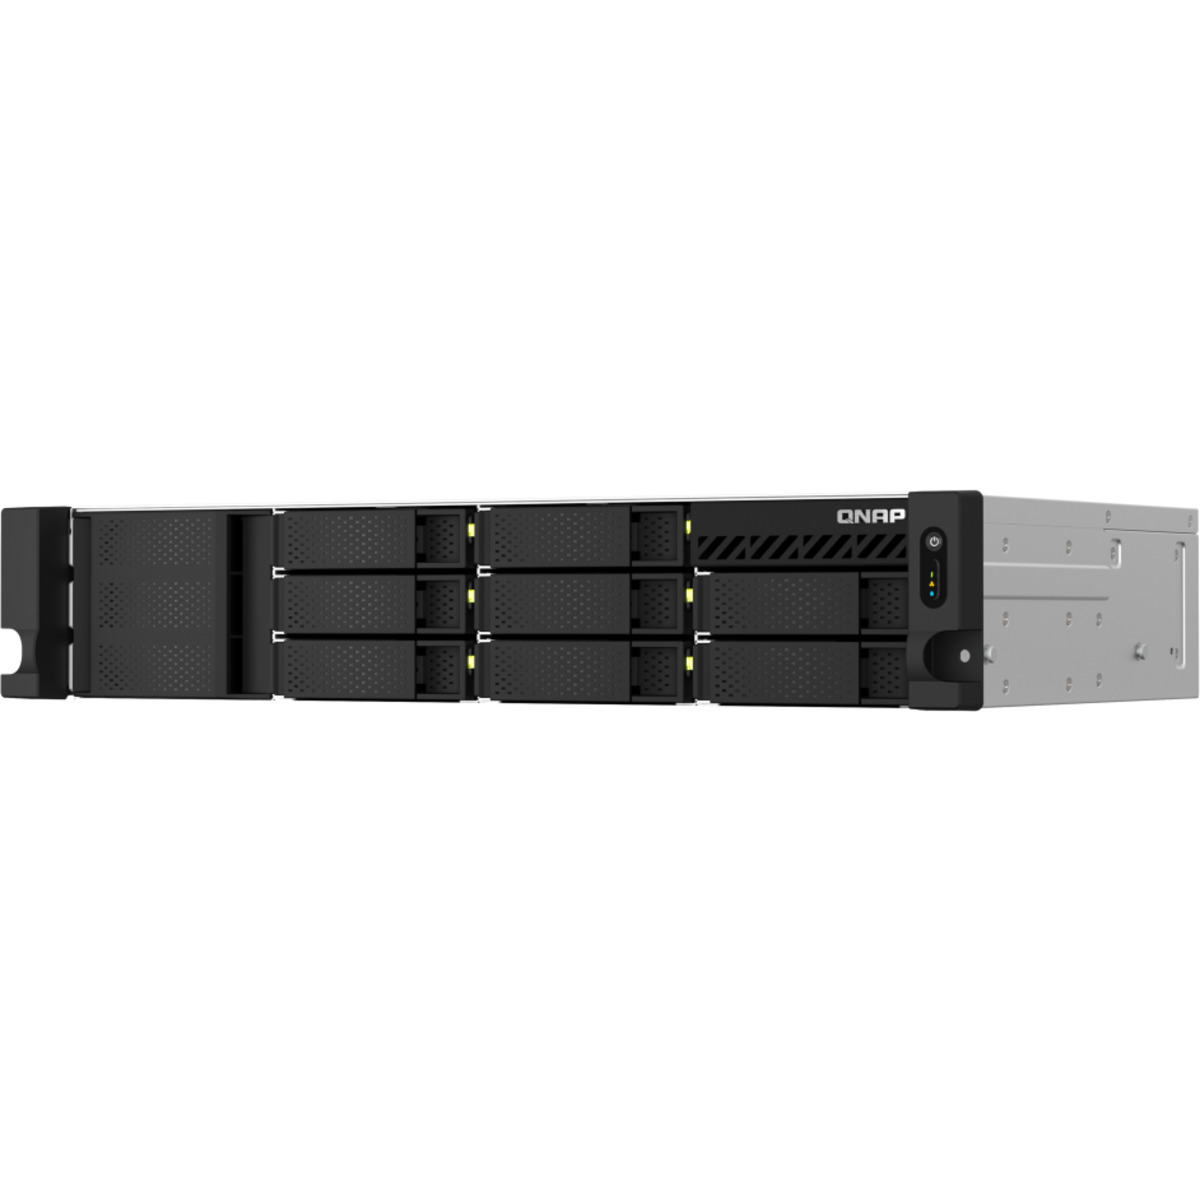 buy $3938 QNAP TS-864eU-RP 48tb RackMount NAS - Network Attached Storage Device 8x6000gb Seagate IronWolf Pro ST6000NT001 3.5 7200rpm SATA 6Gb/s HDD NAS Class Drives Installed - Burn-In Tested - FREE RAM UPGRADE - nas headquarters buy network attached storage server device das new raid-5 free shipping simply usa TS-864eU-RP